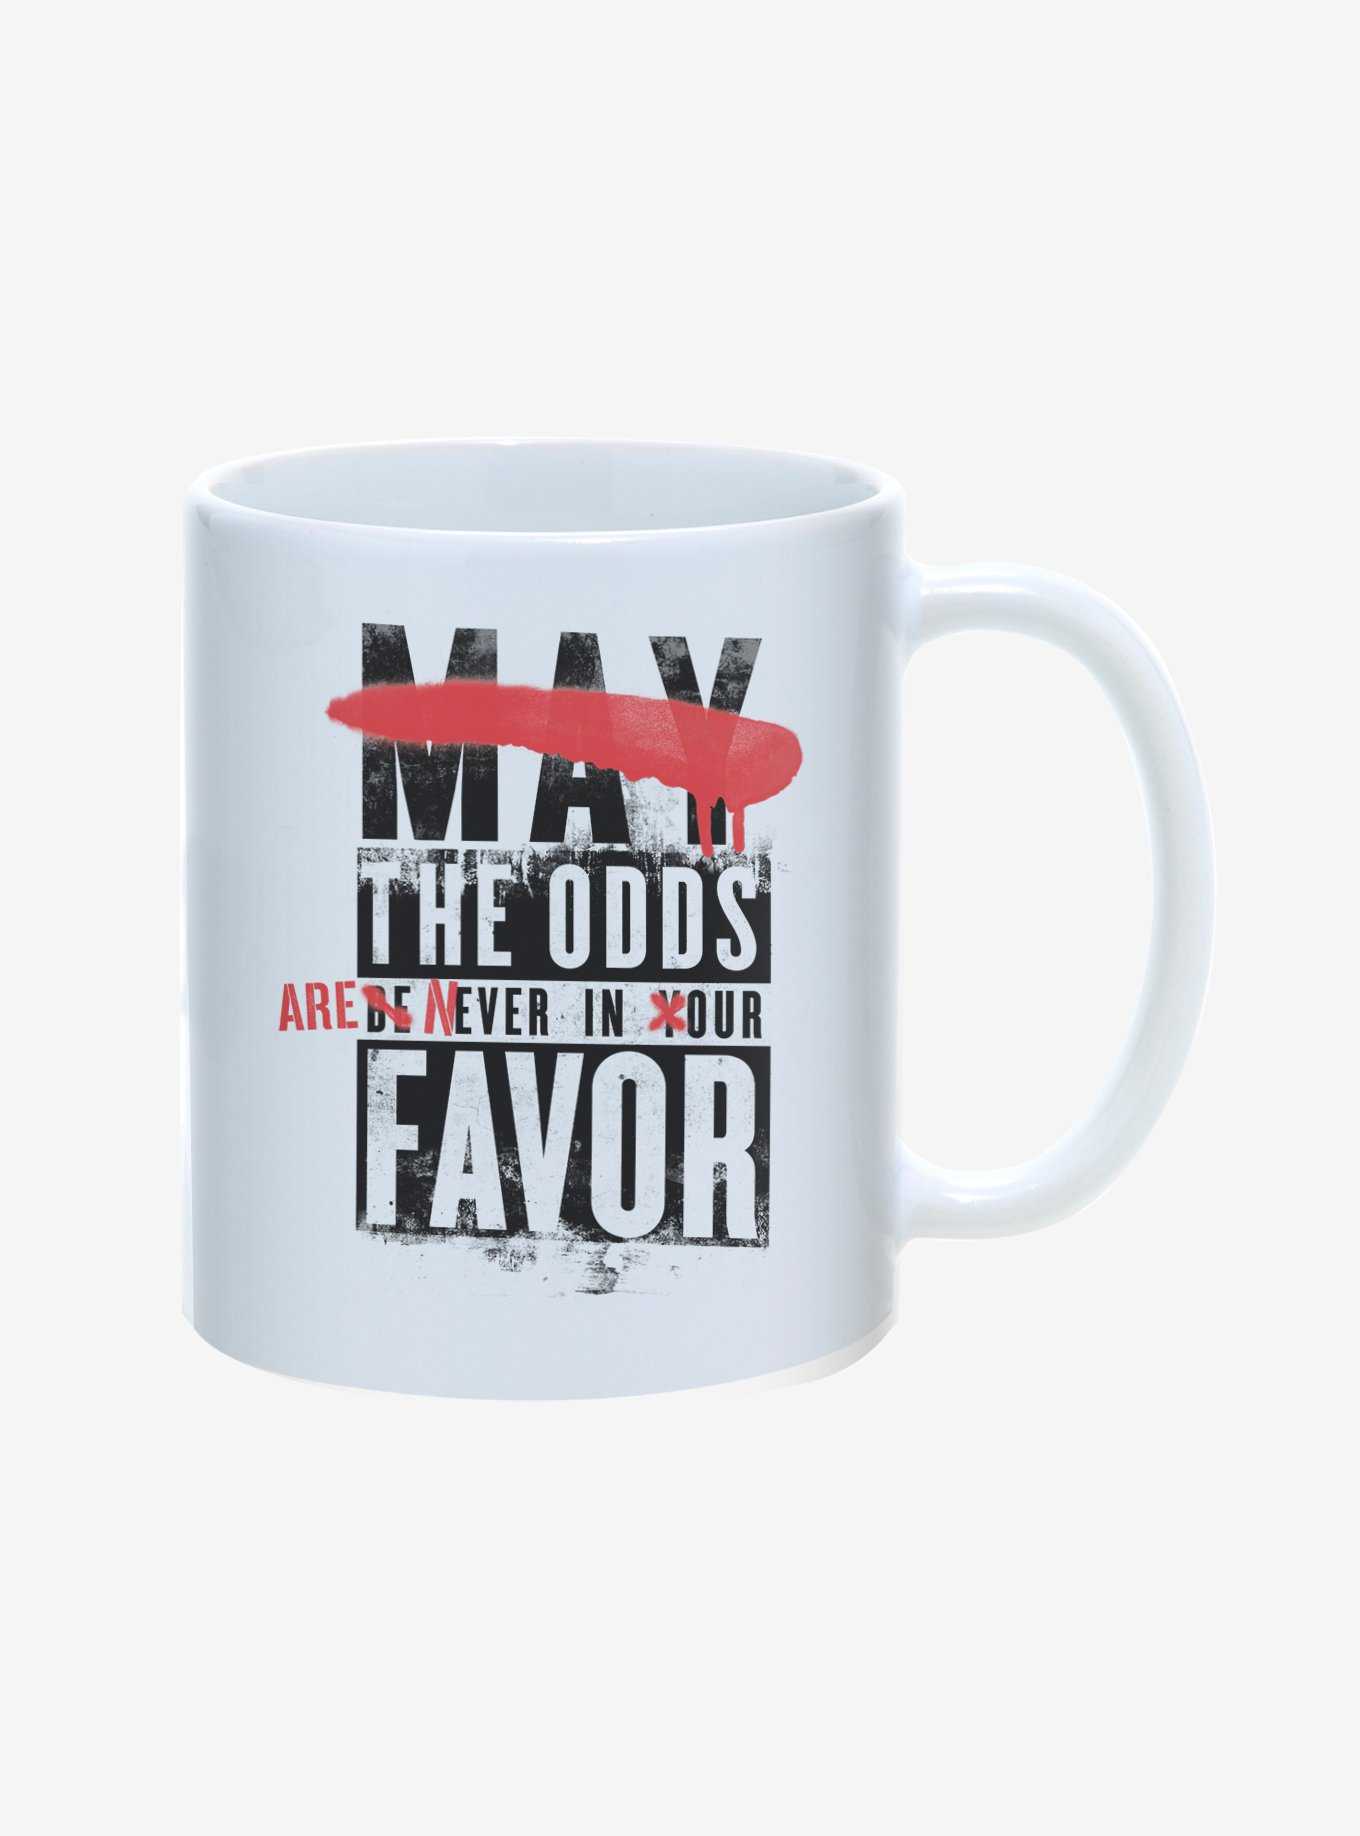 Hunger Games The Odds Are Never In Our Favor Mug 11oz, , hi-res